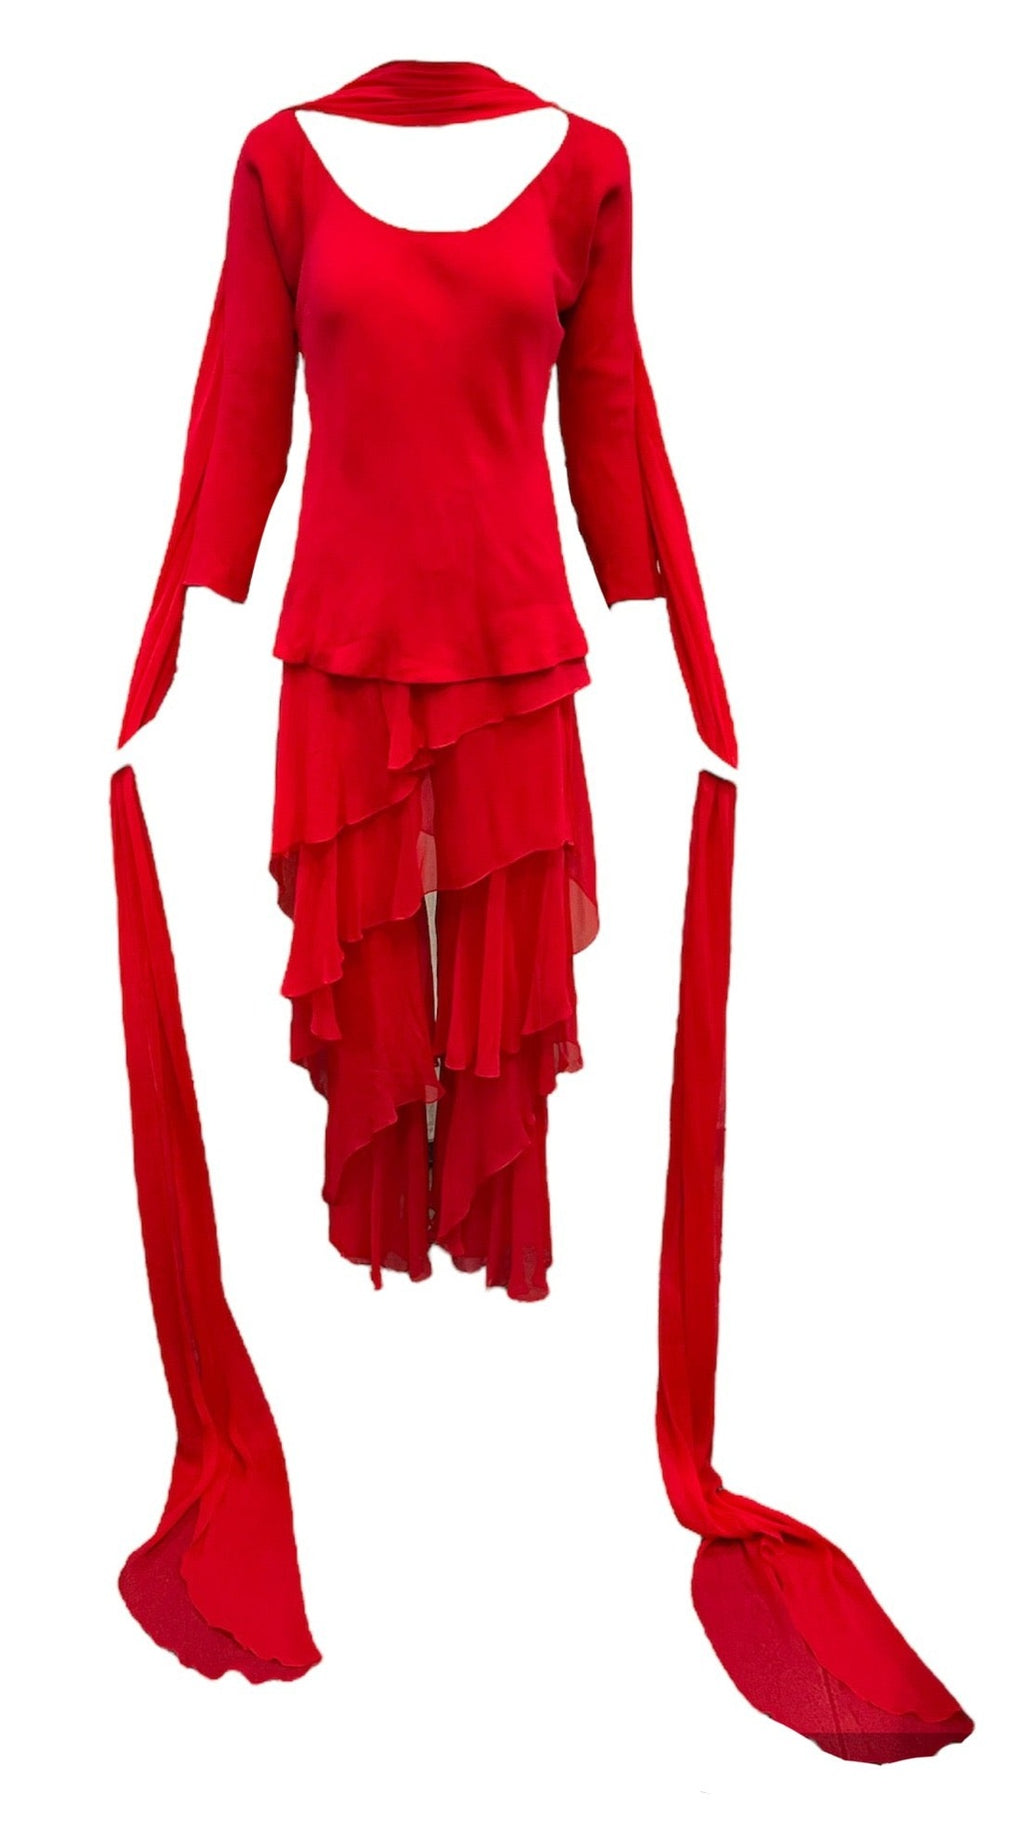 Halston 1970s Lipstick Red Chiffon Ruffled Ensemble with Pants FRONT 1 of 6